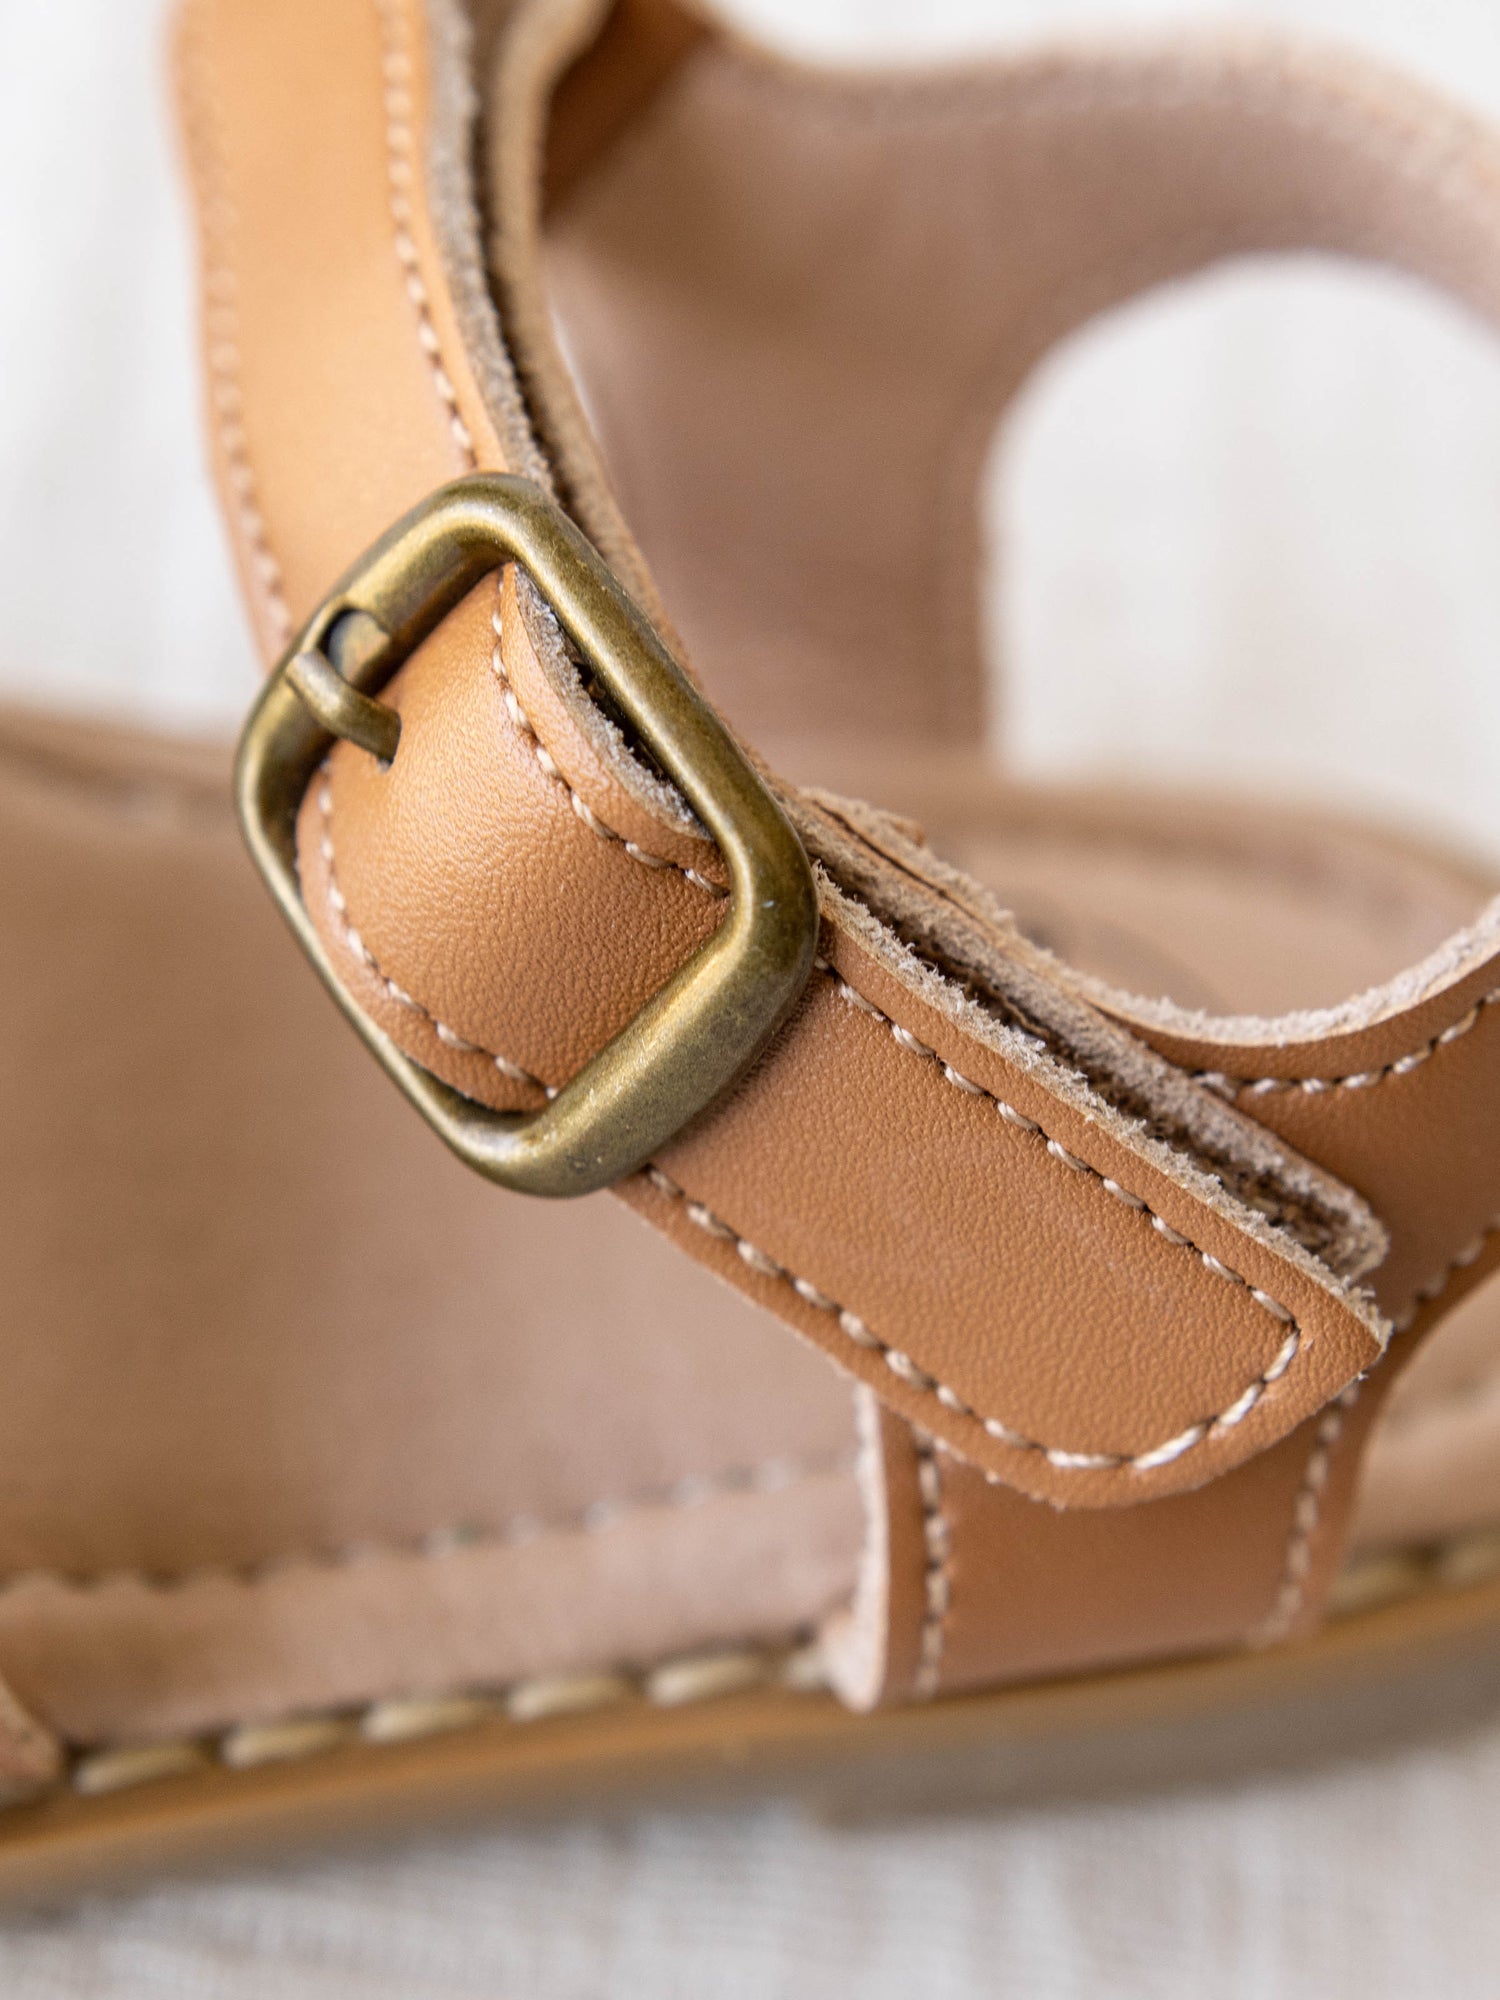 Closeup of the other buckle and the beautiful thread trim on these sandals.